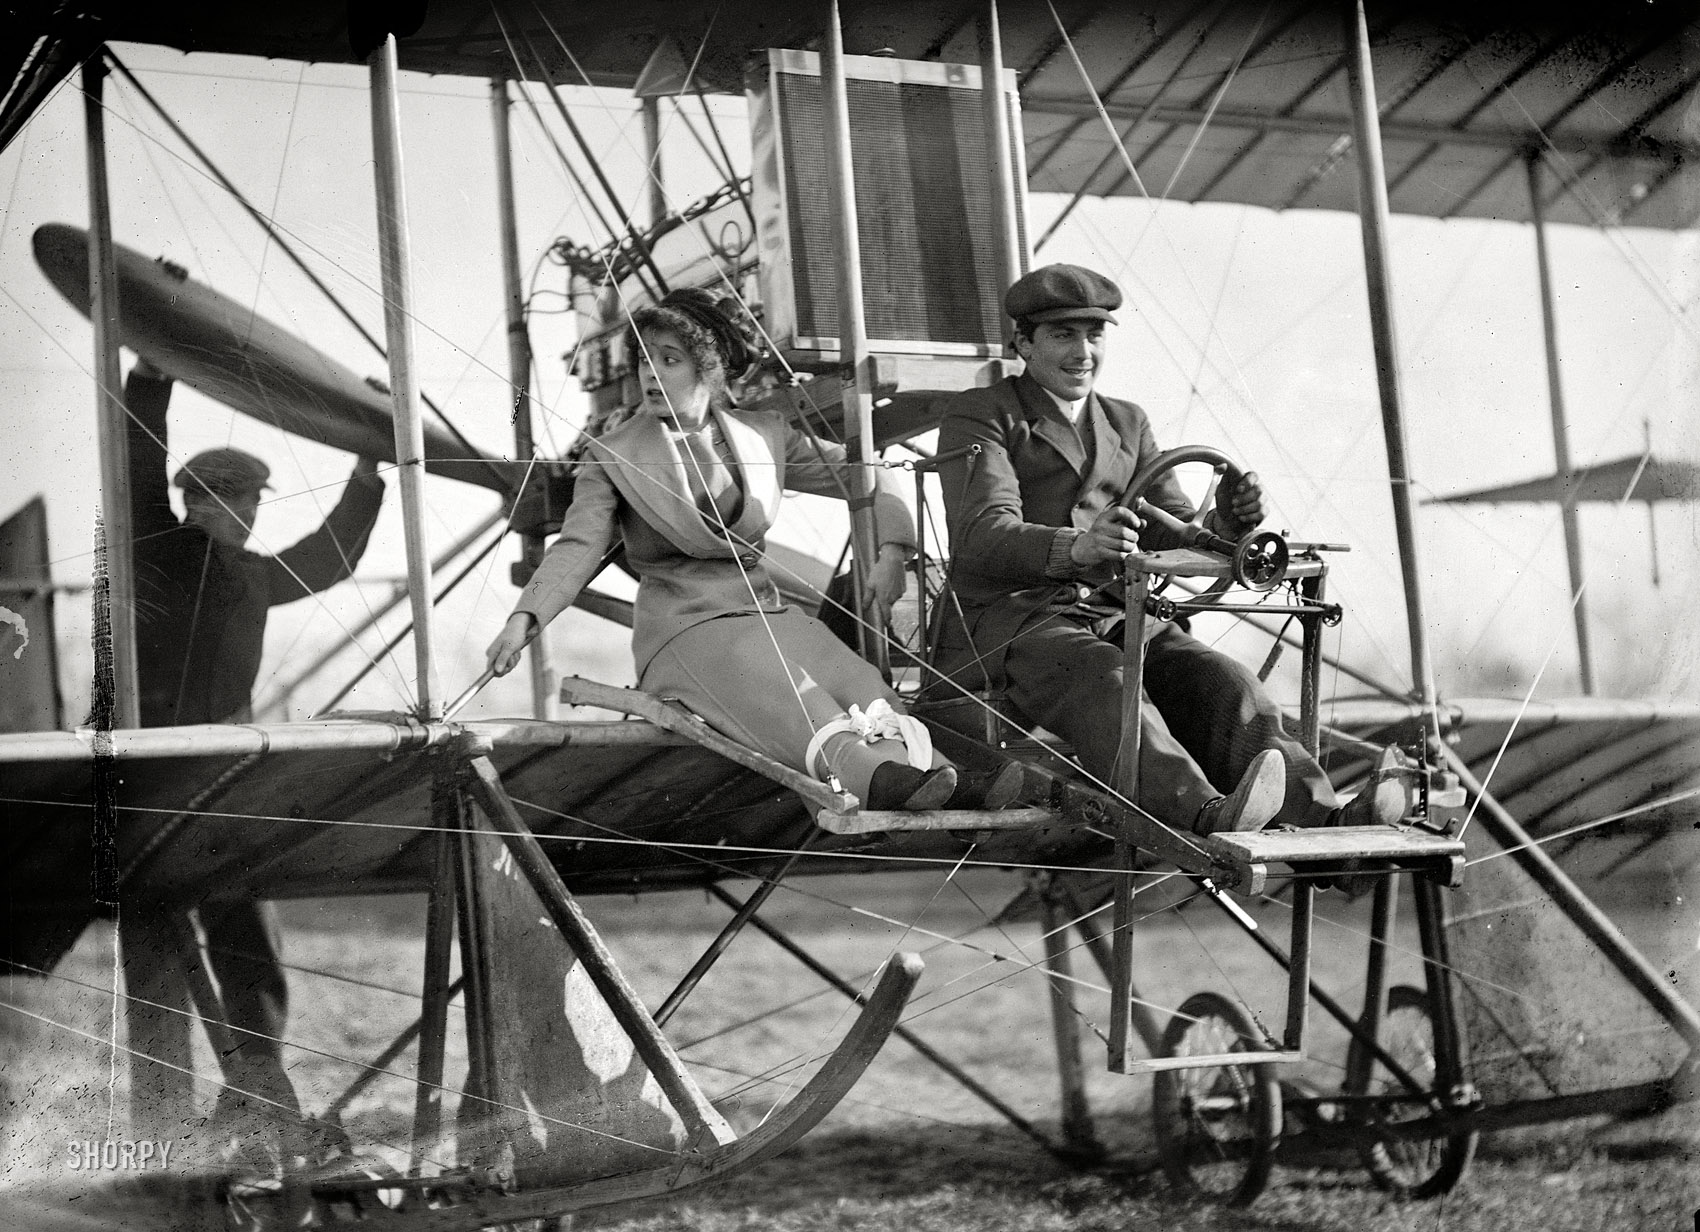 Washington, D.C., or vicinity circa 1911. "Senorita Lenore Riviero with Antony Jannus in Rex Smith aeroplane." Please fasten your seatbelts (or skirts) while we prepare for departure. Tony Jannus, the pioneering but short-lived Washington aviator, a few years before his final flight landed him somewhere at the bottom of the Black Sea. Harris & Ewing Collection glass negative. View full size.